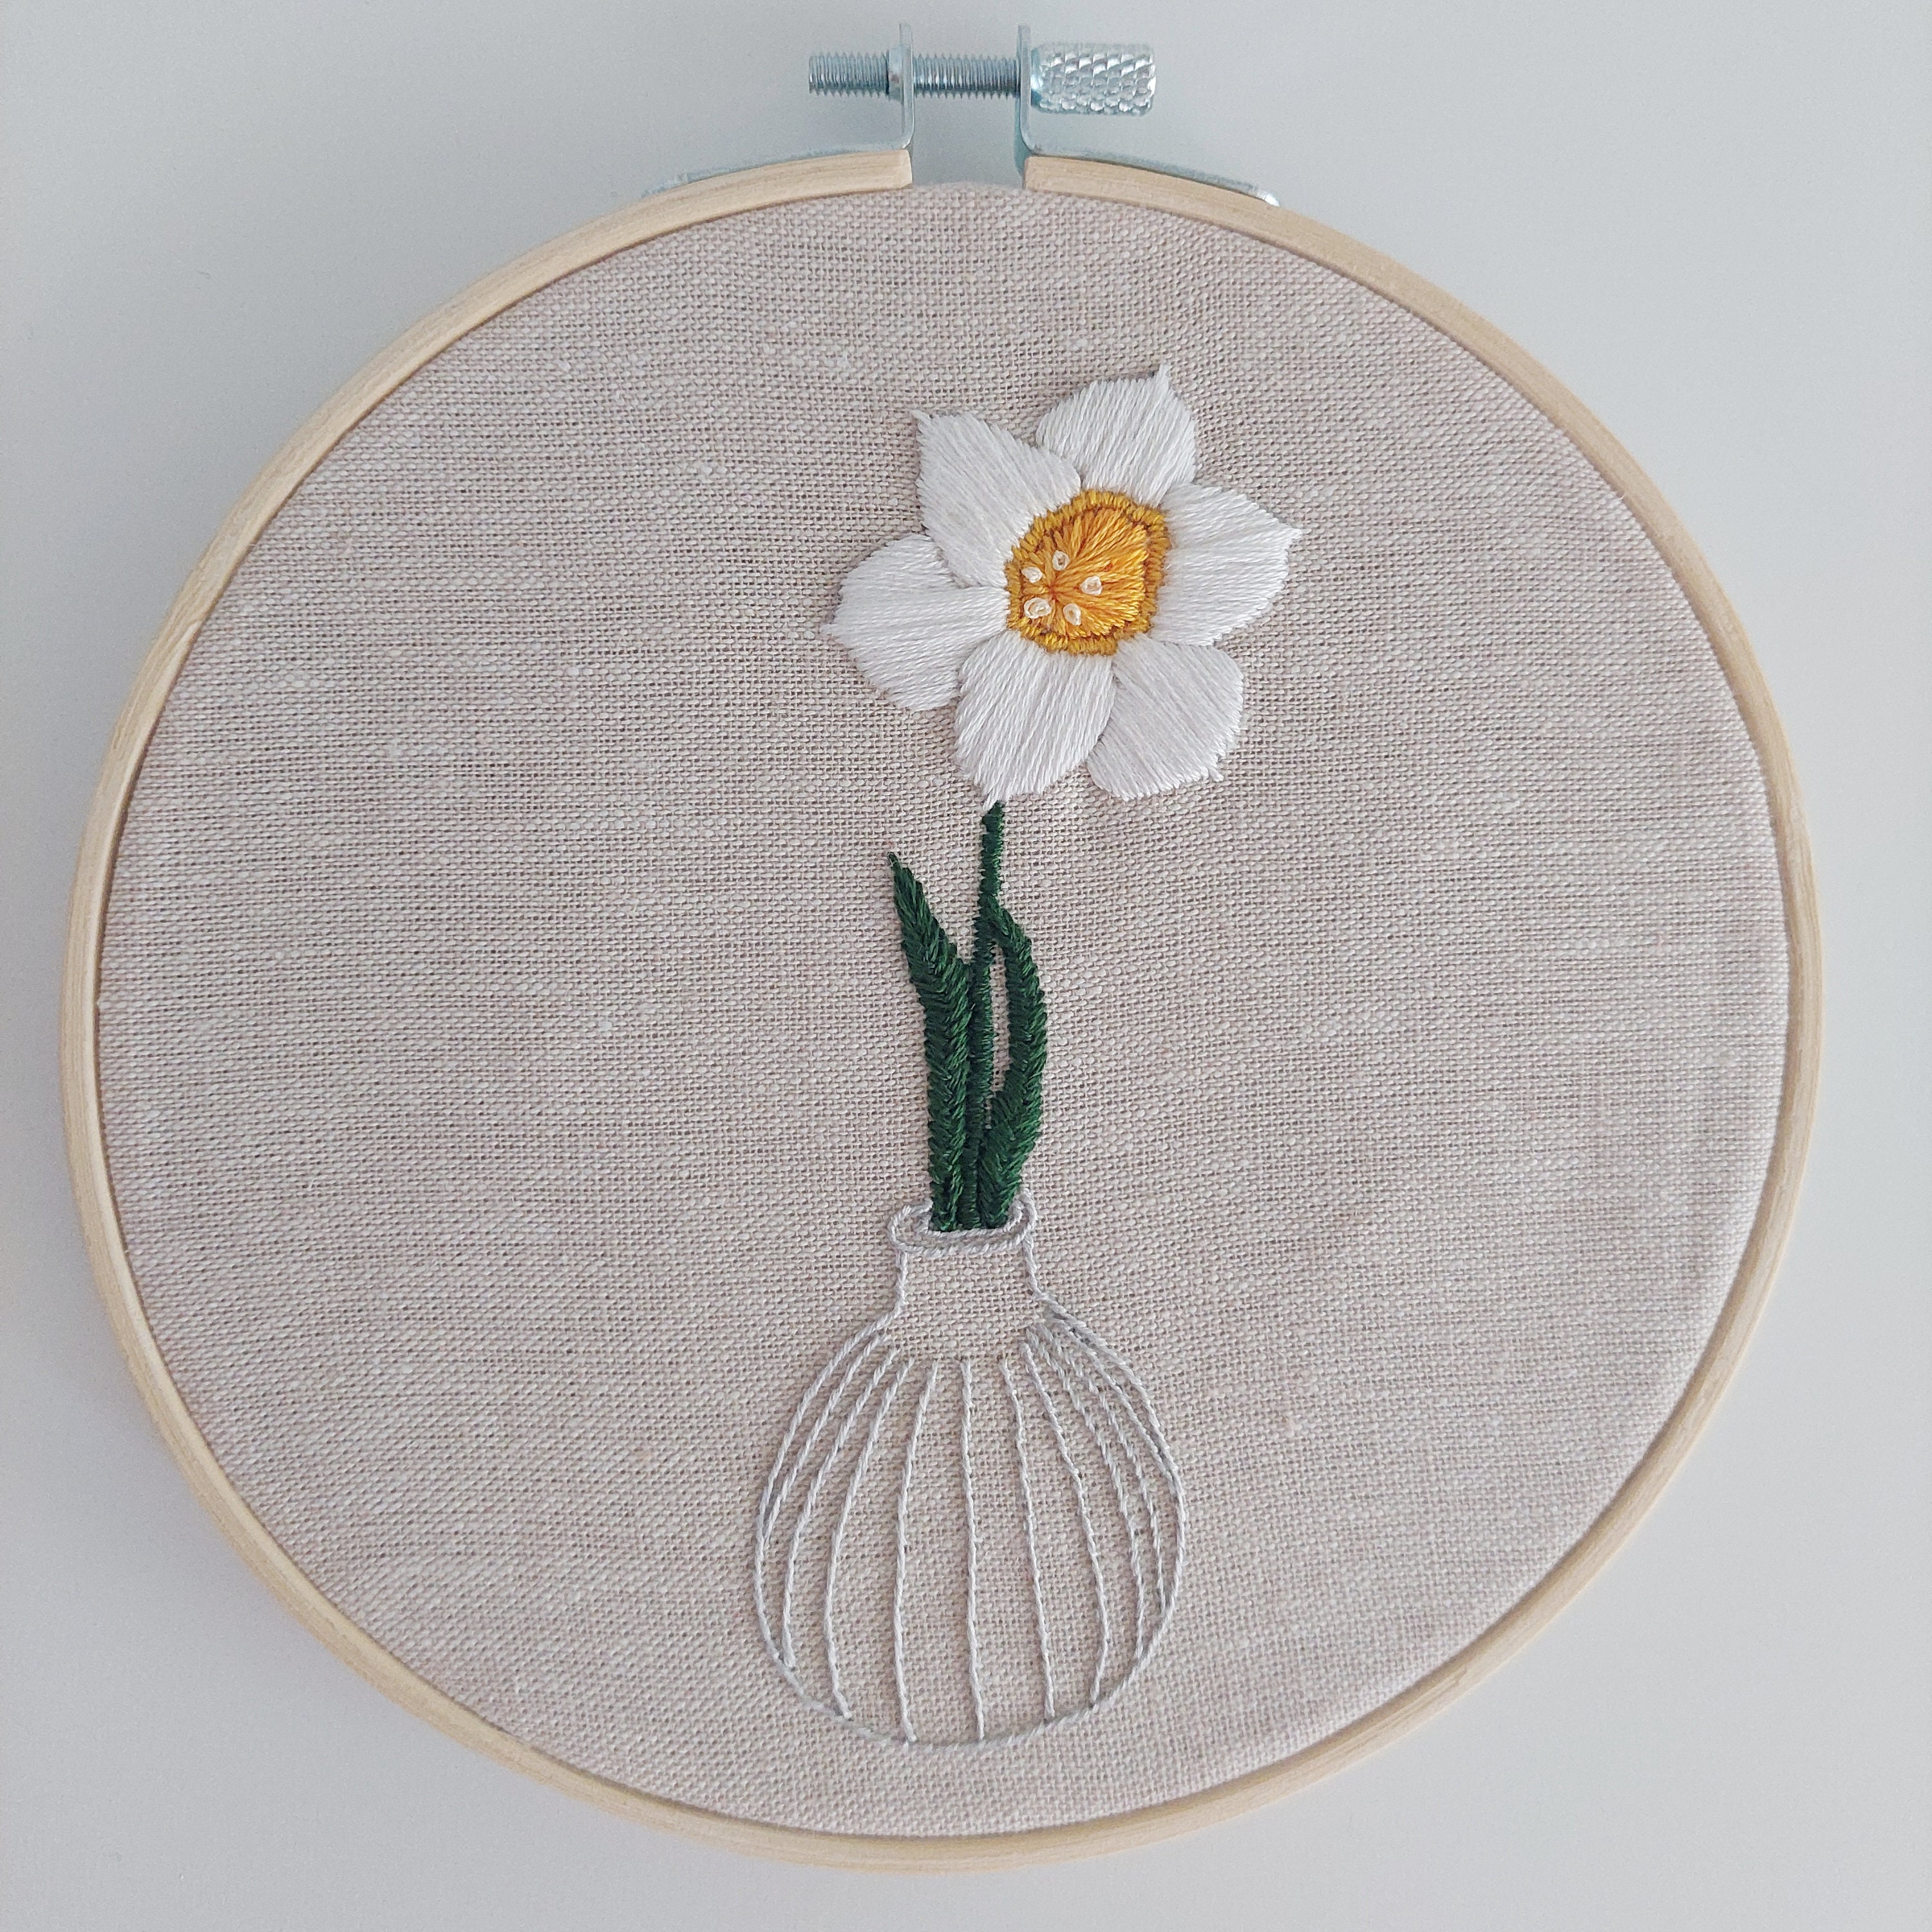 Hand Embroidery Hoop Art with Free Pattern ❤️ Embroidery by